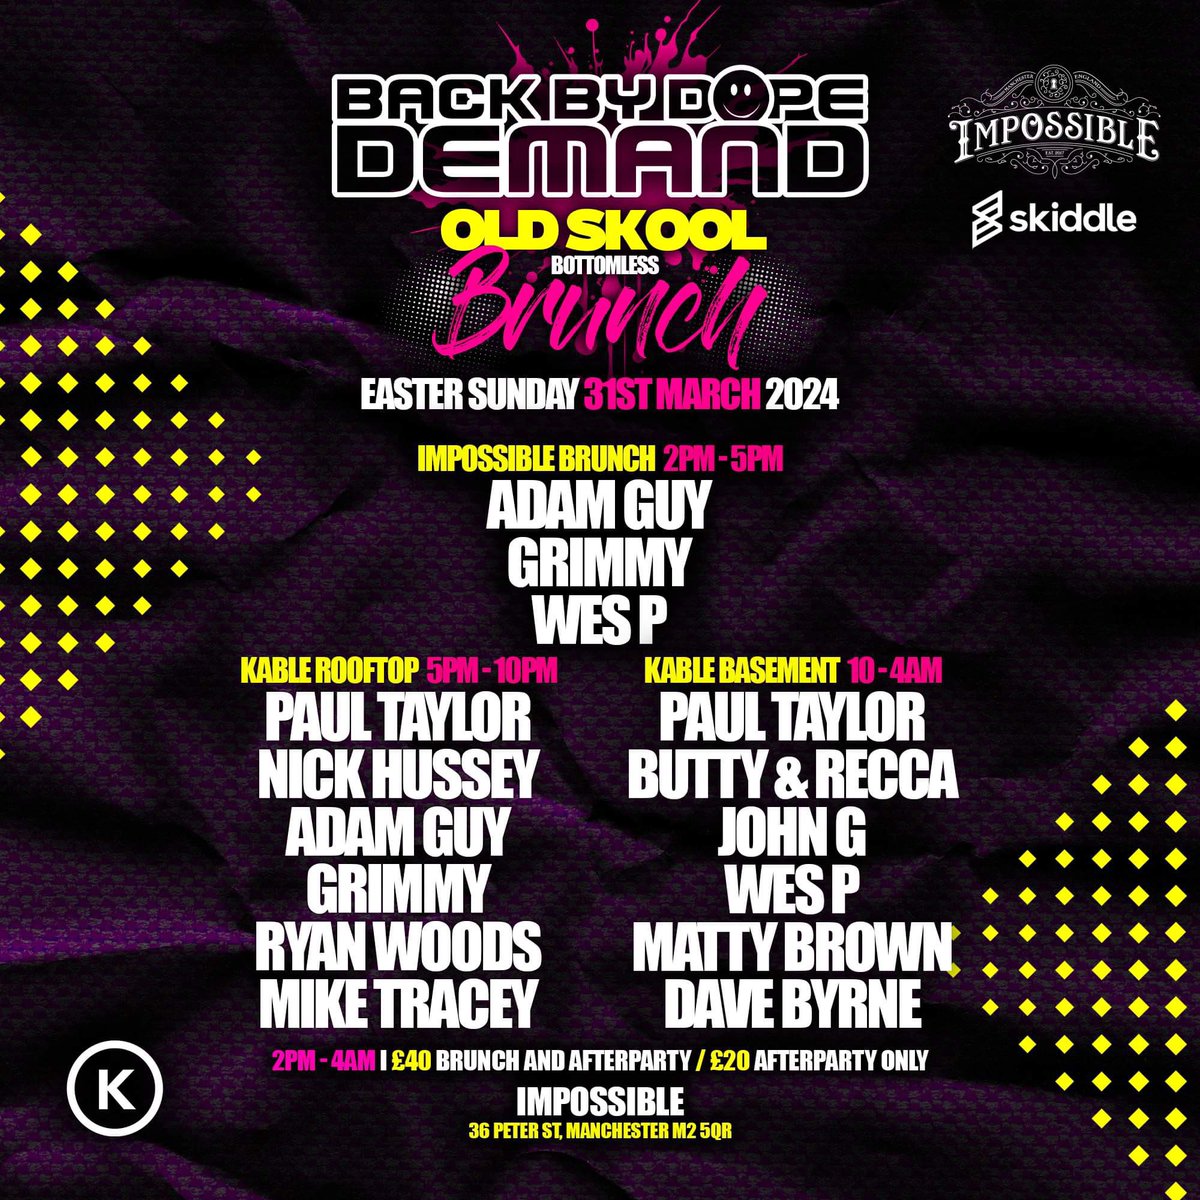 Easter Sunday @bbdduk Brunch 2-5pm Roof 5-10pm Club 10-4am 14 hours of old skool anthems! Tickets 👉 bbdd.co.uk